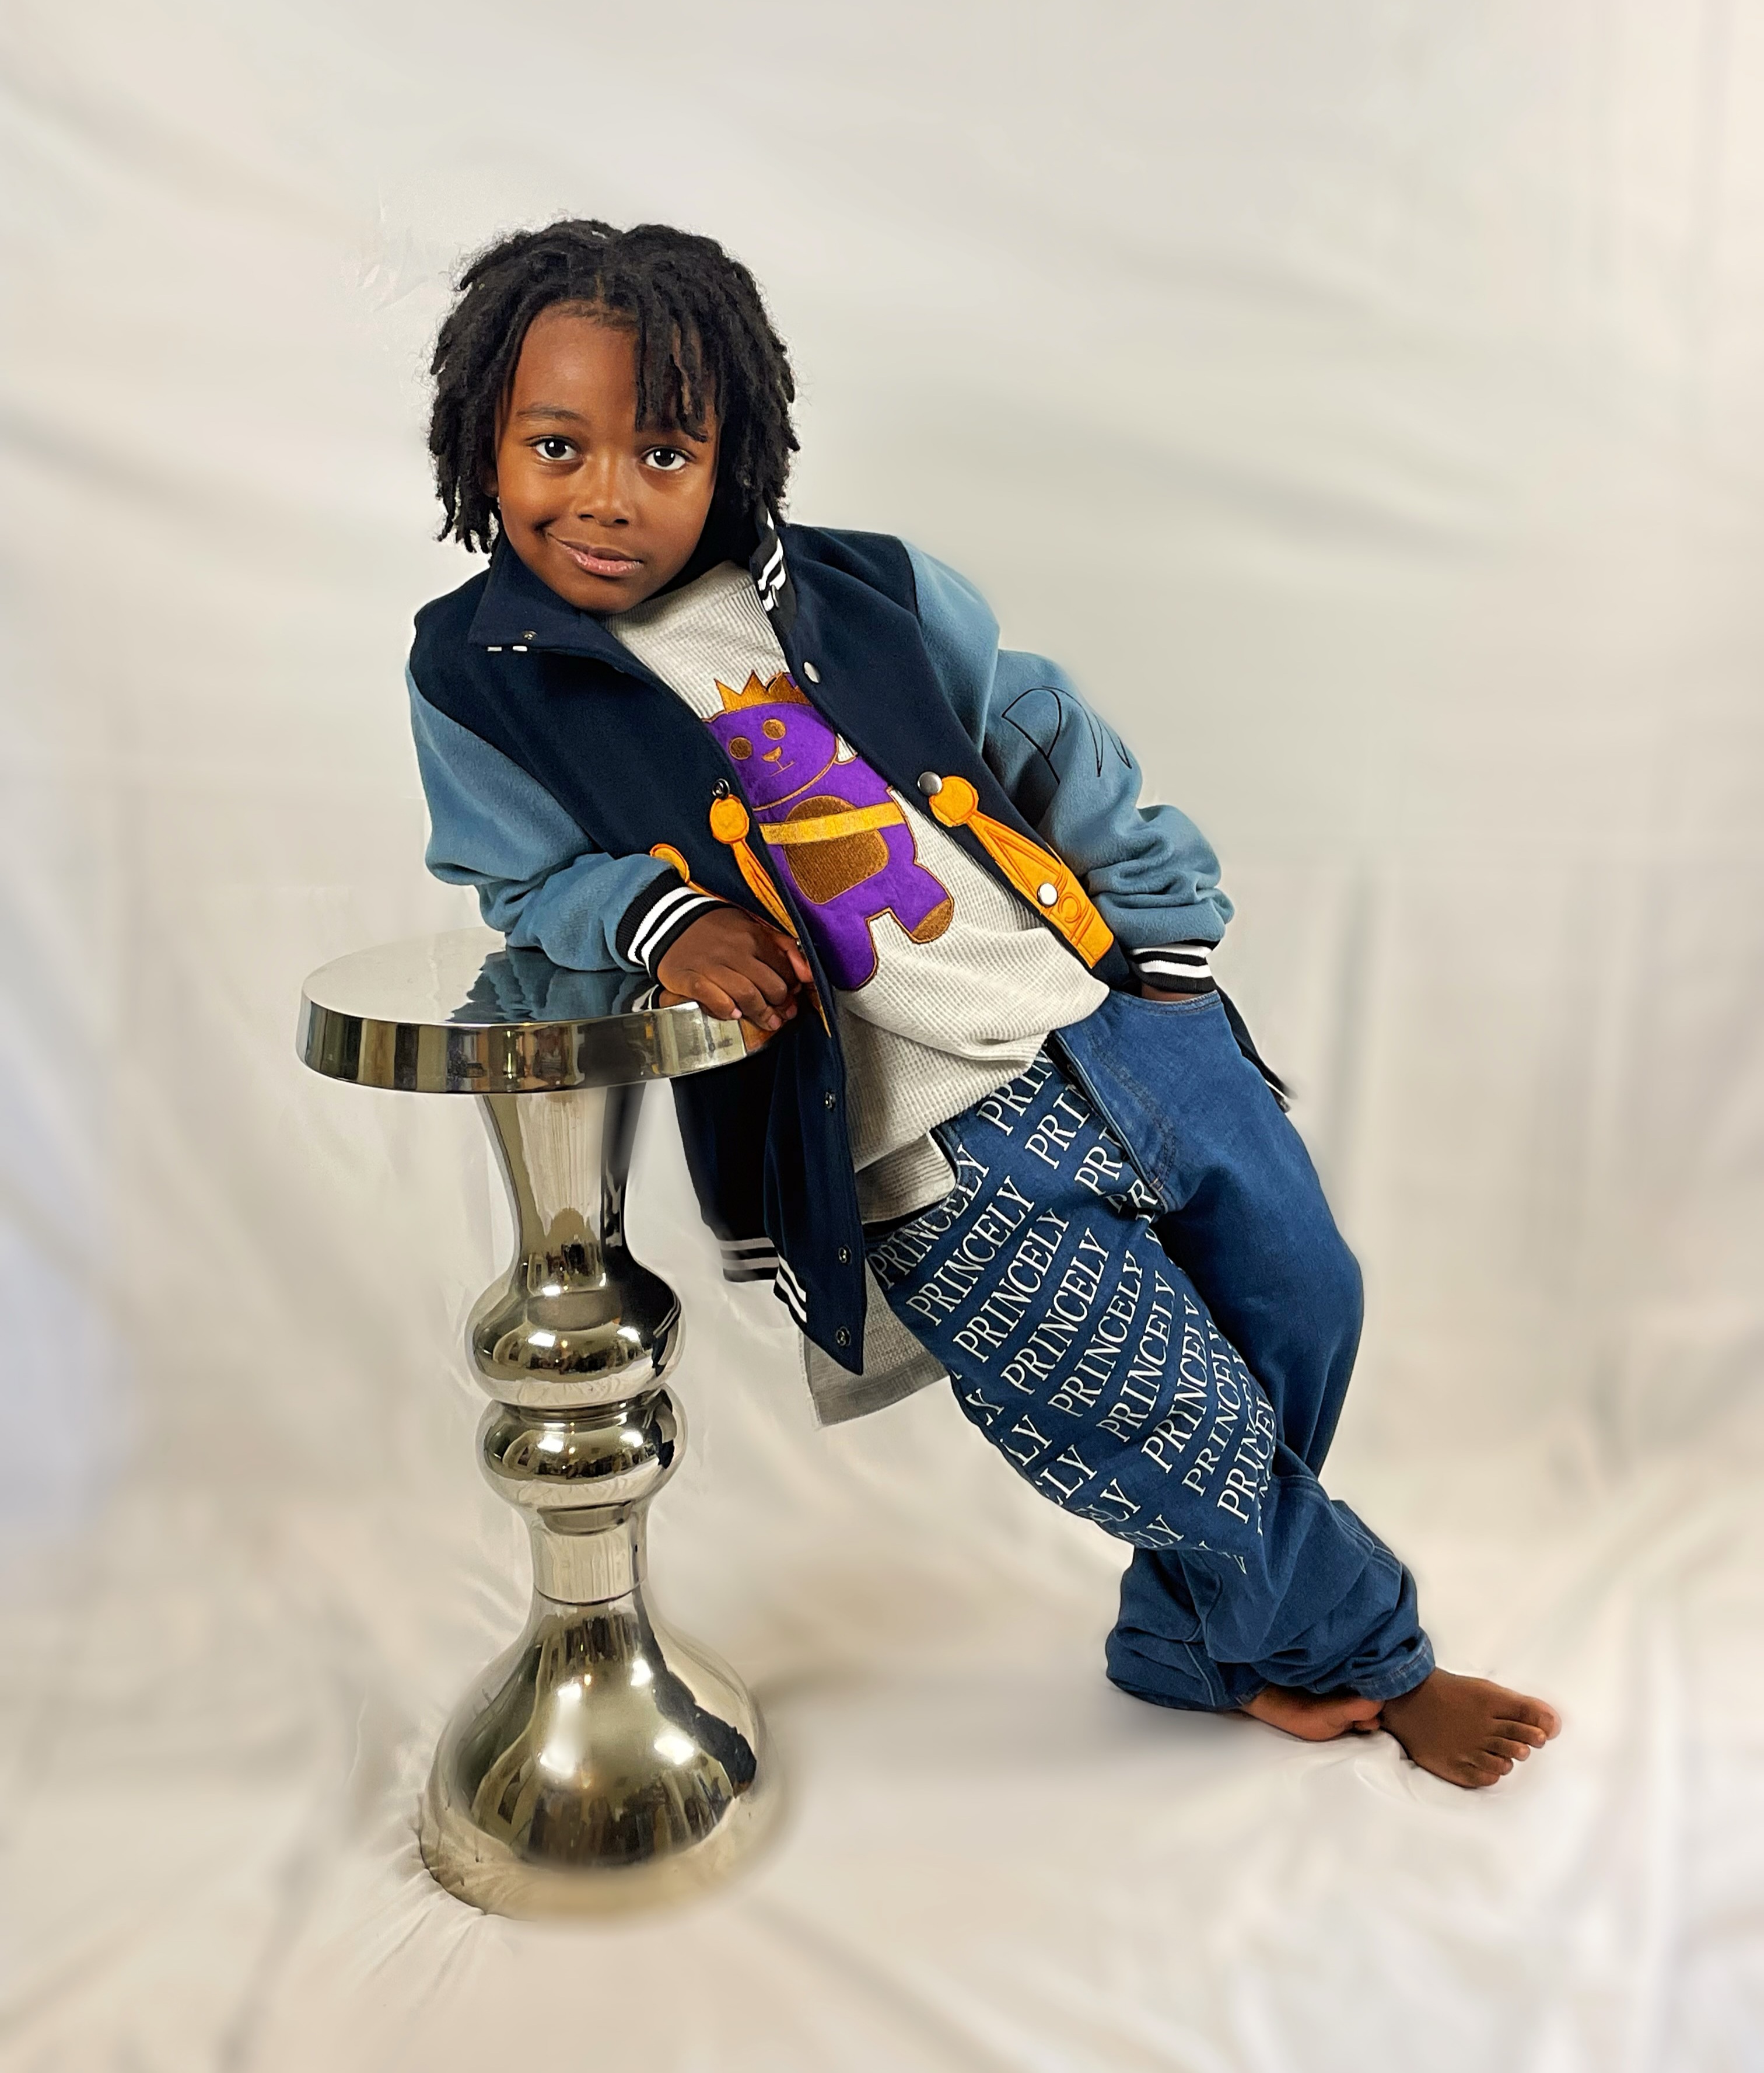 PRINCELY WEAR: A stylish clothing line for young boys that is different from the norm!